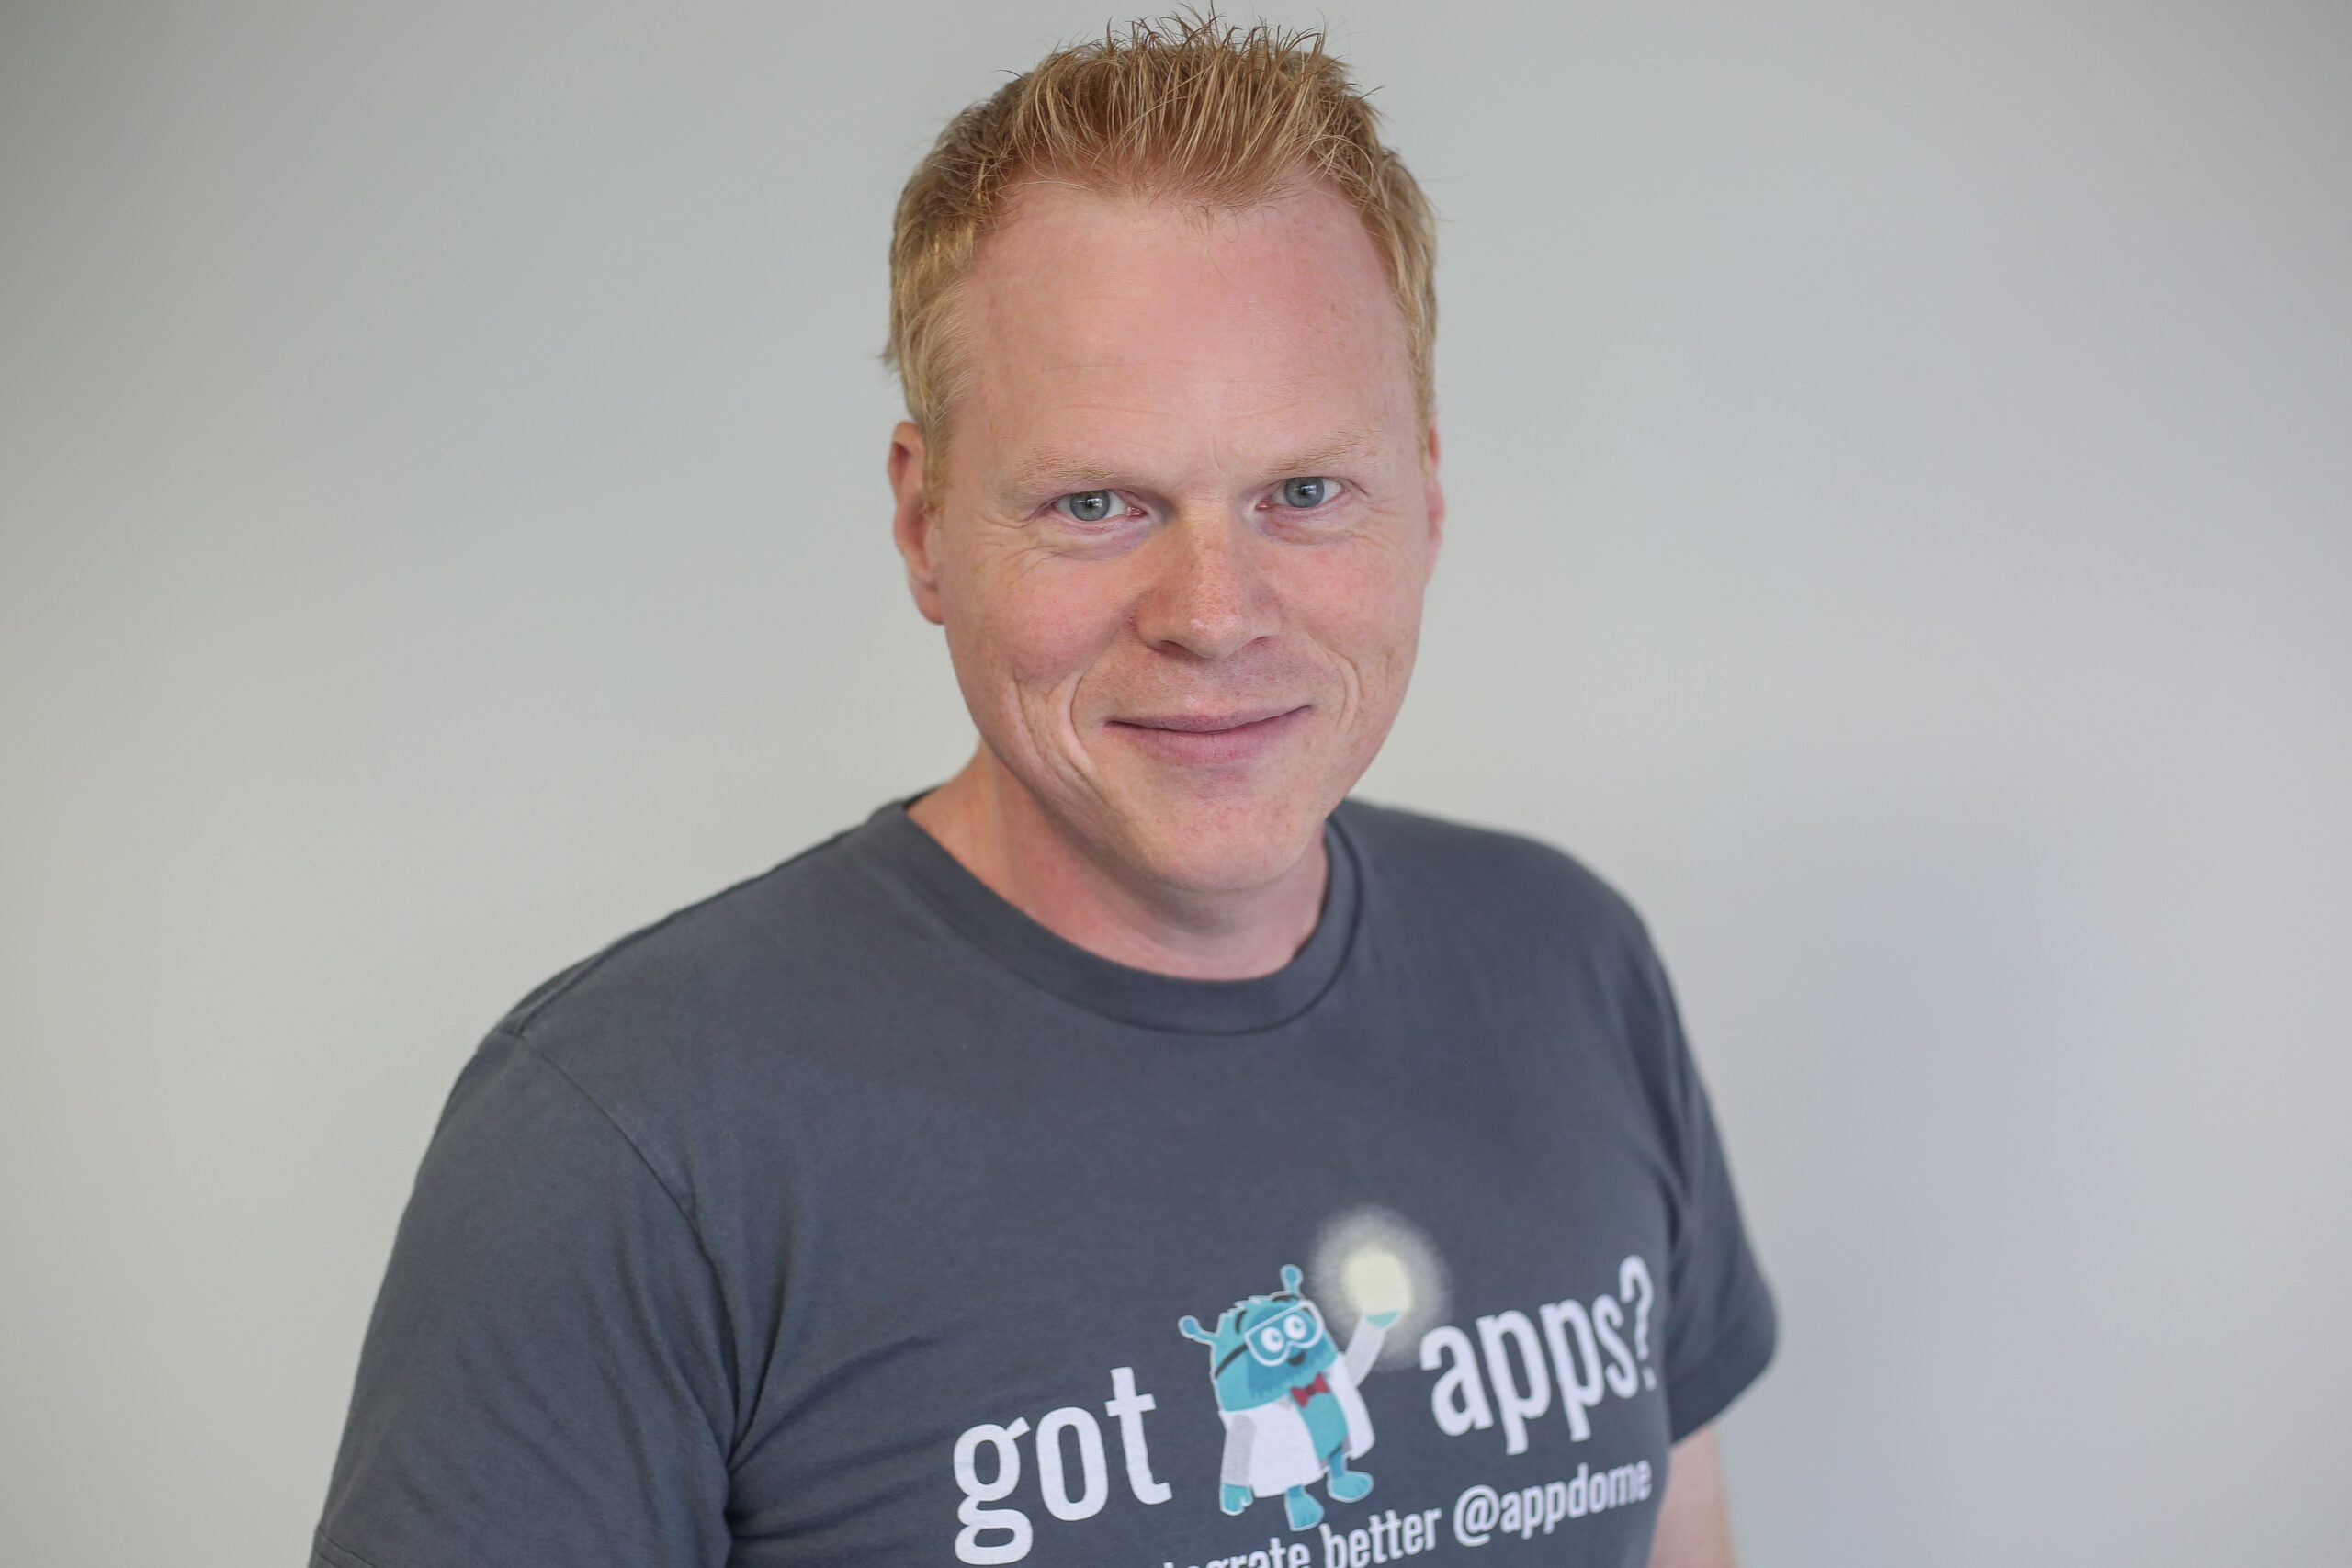 Jan Sysmans, Mobile App Security Evangelist at Appdome